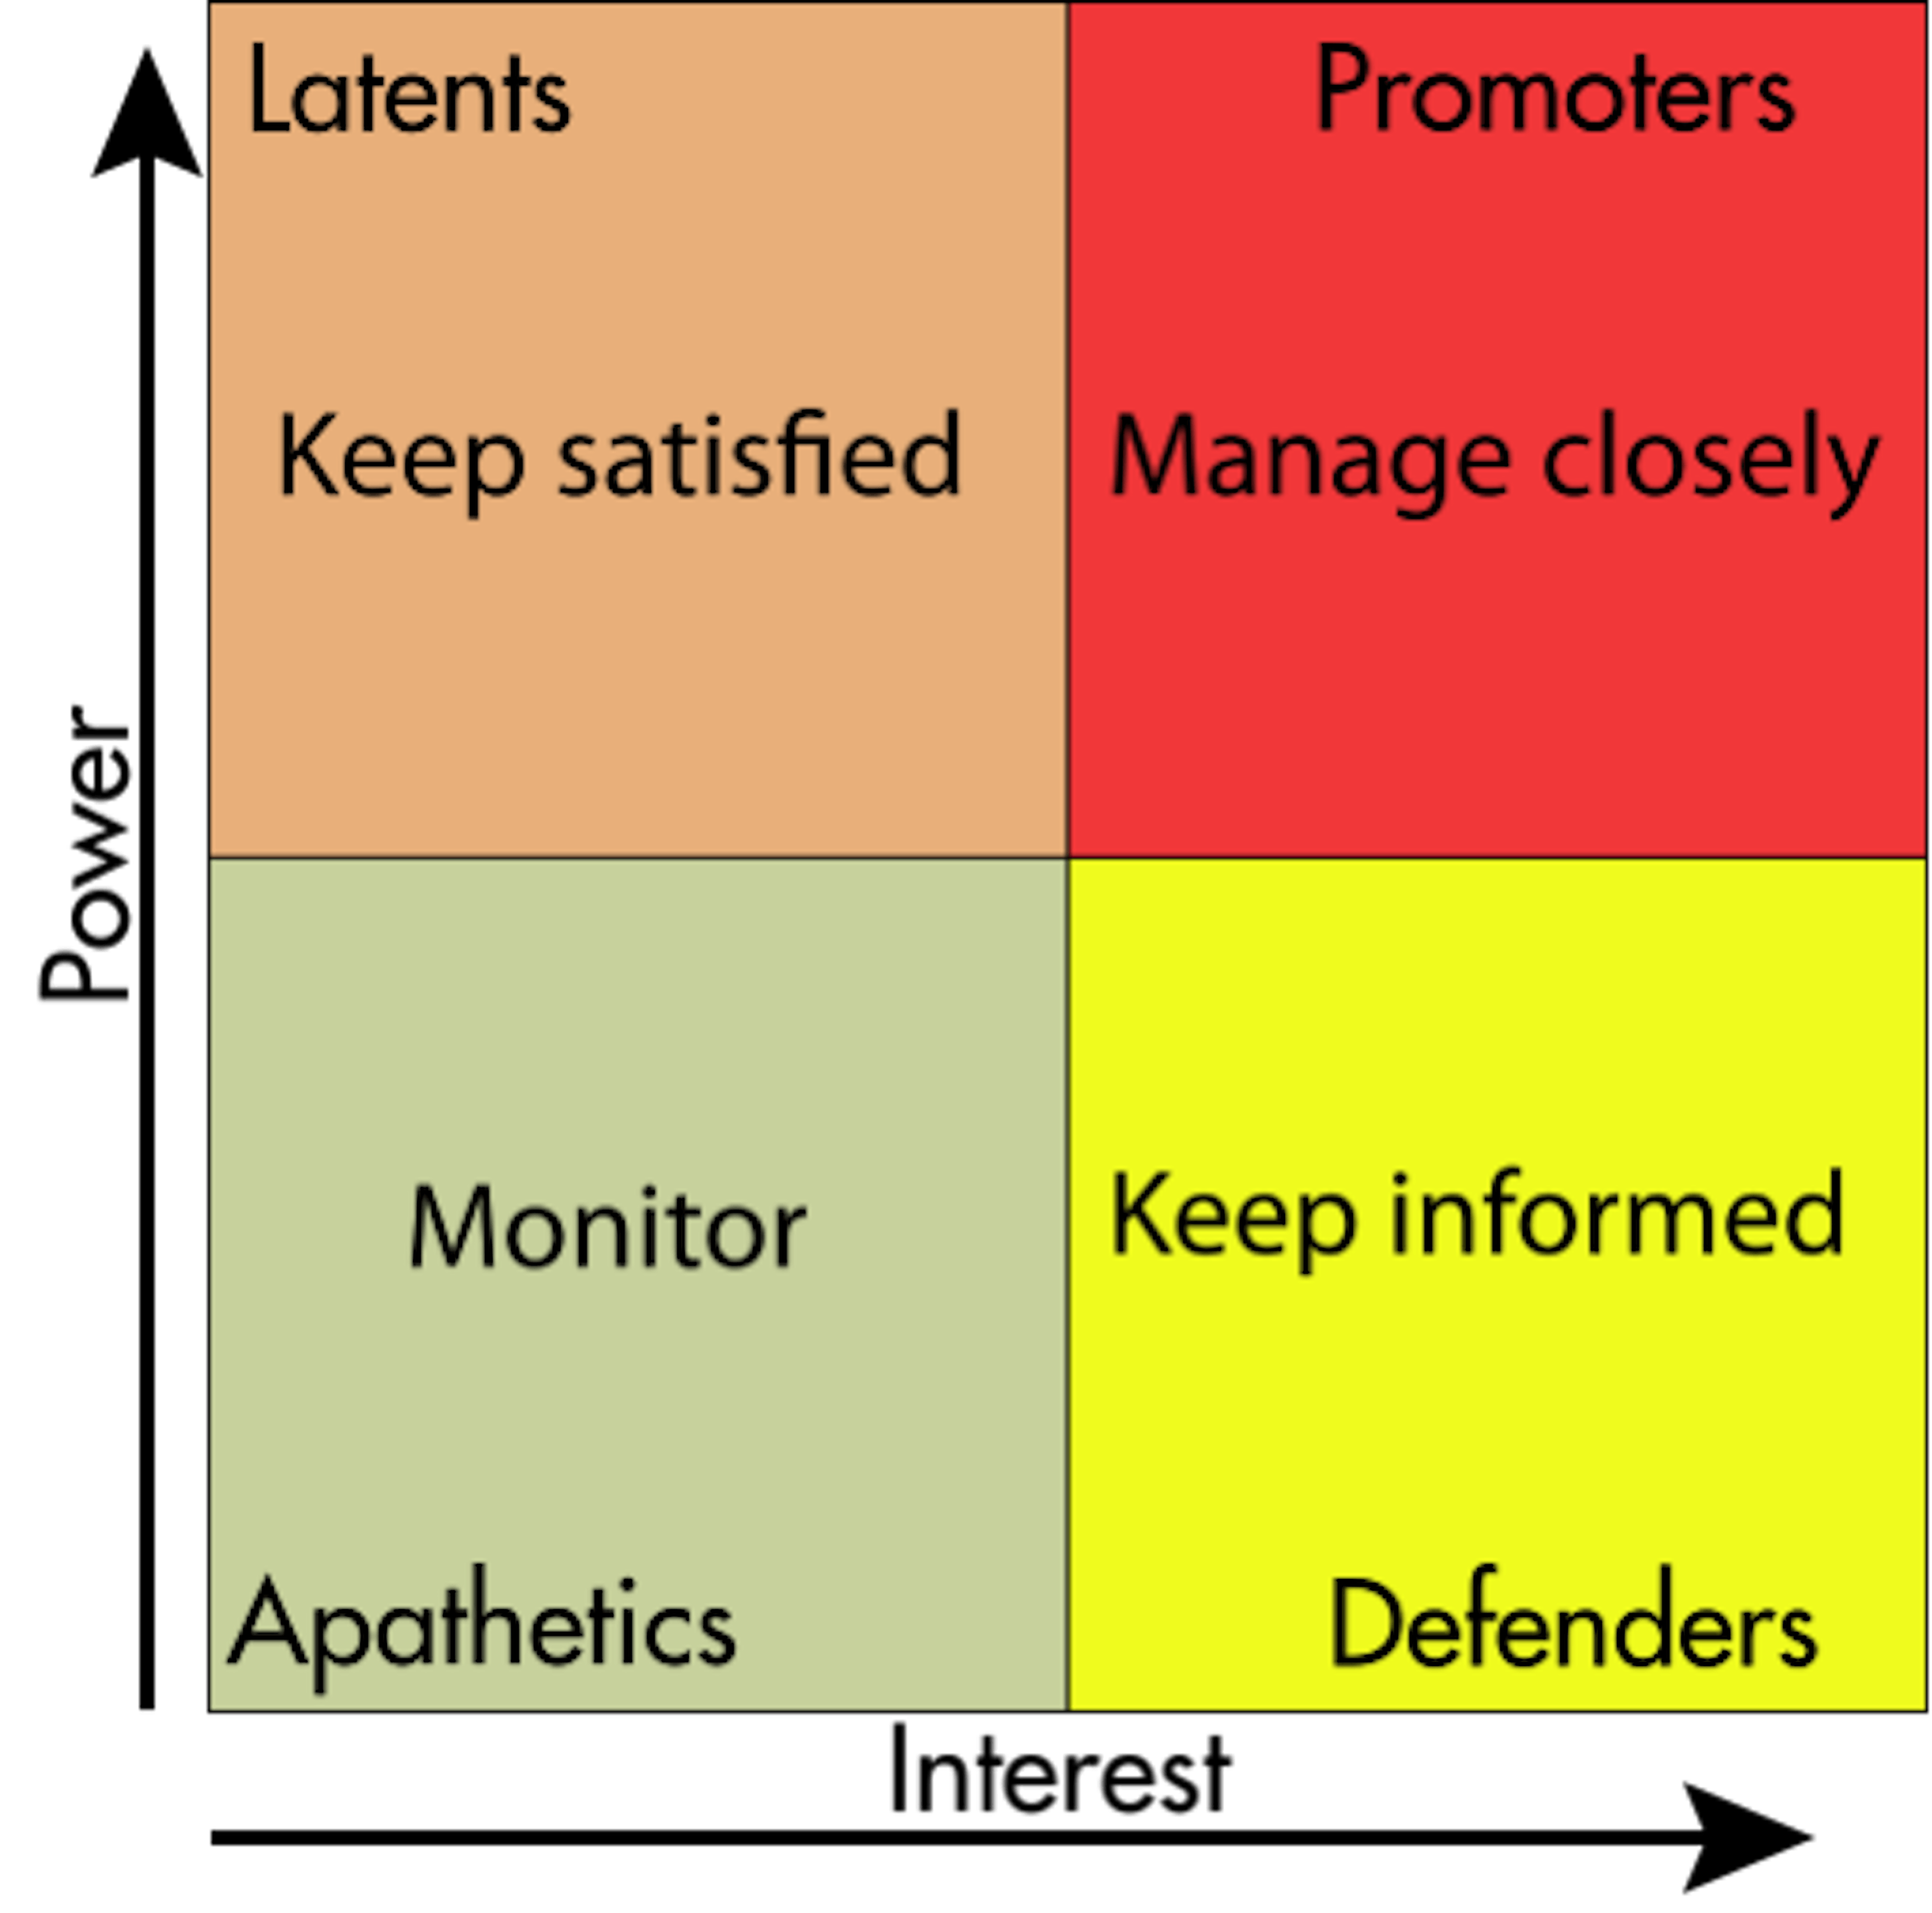 /the-product-manager-guide-to-identifying-and-managing-project-stakeholders-856a35bw feature image